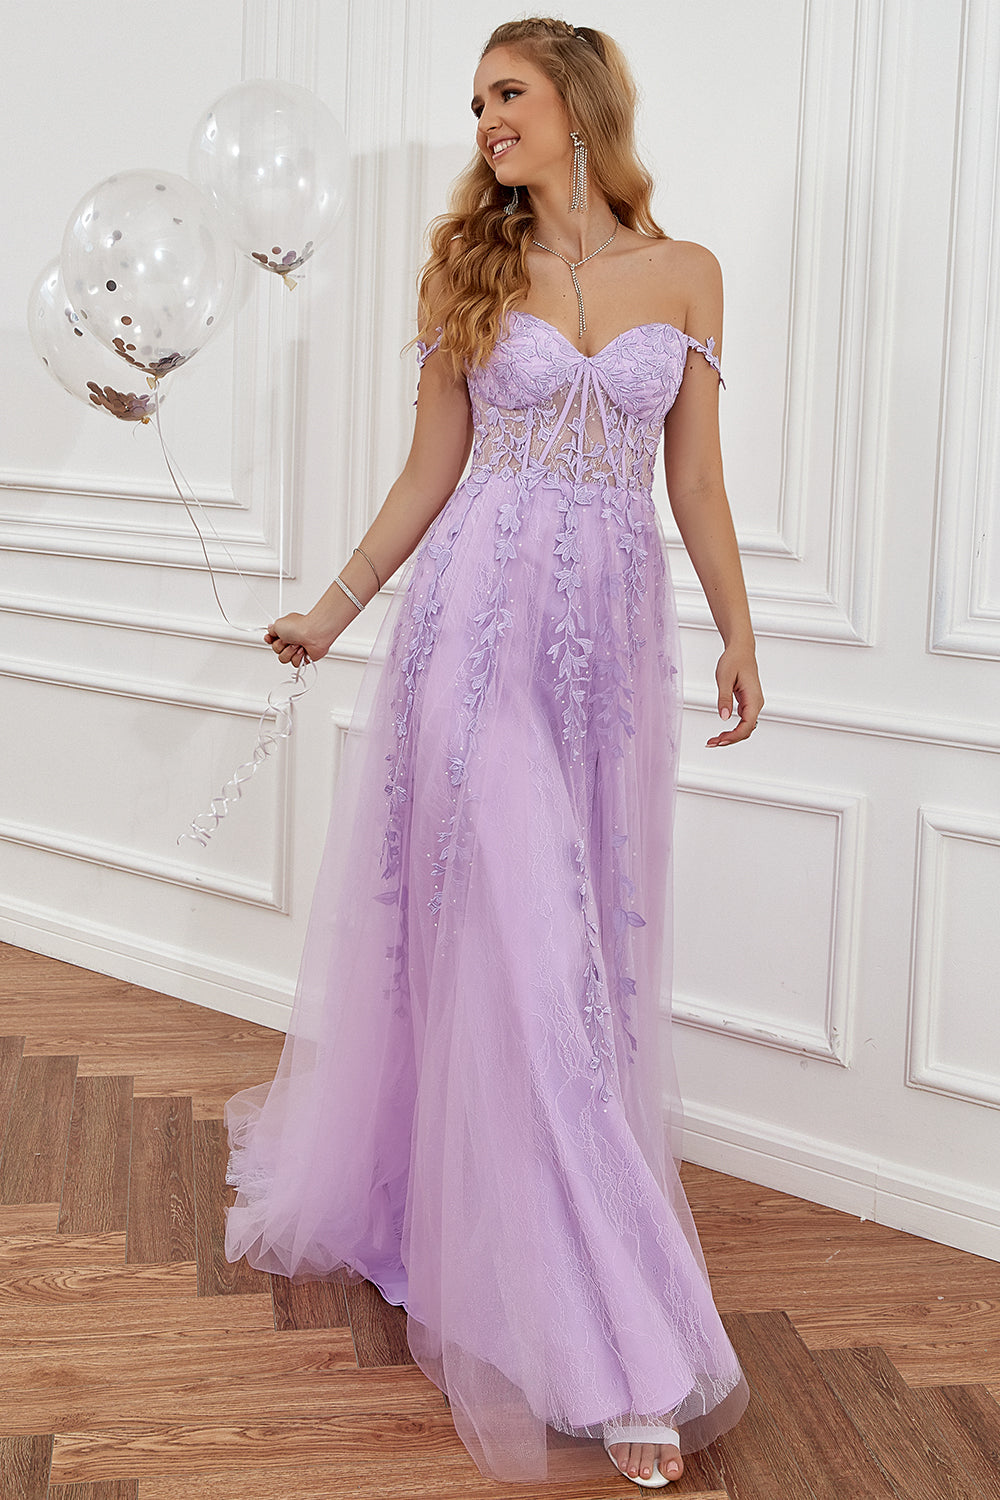 Purple Off the Shoulder Long Prom Dress with Appliques